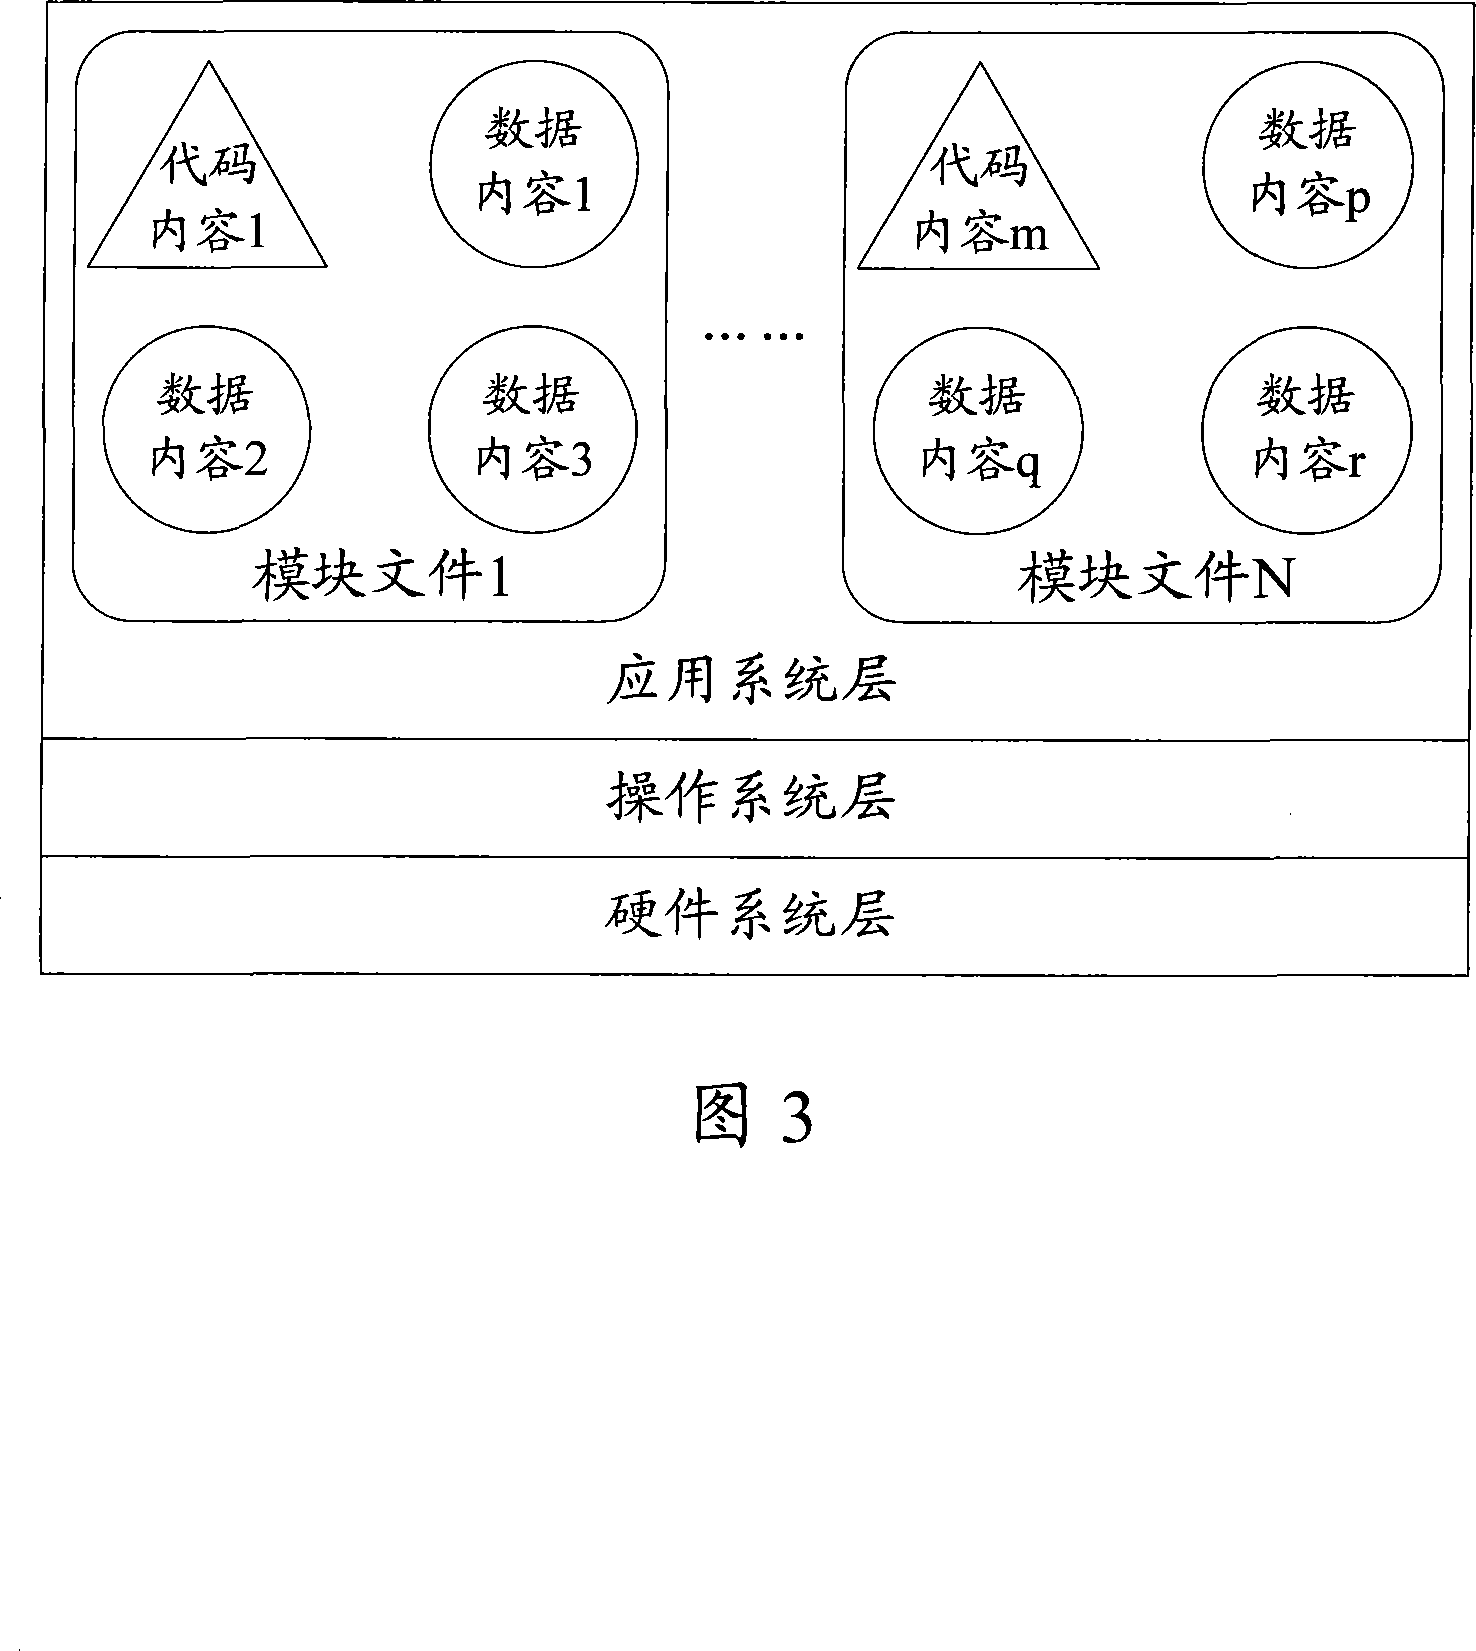 Information safety equipment and its file memory and access method